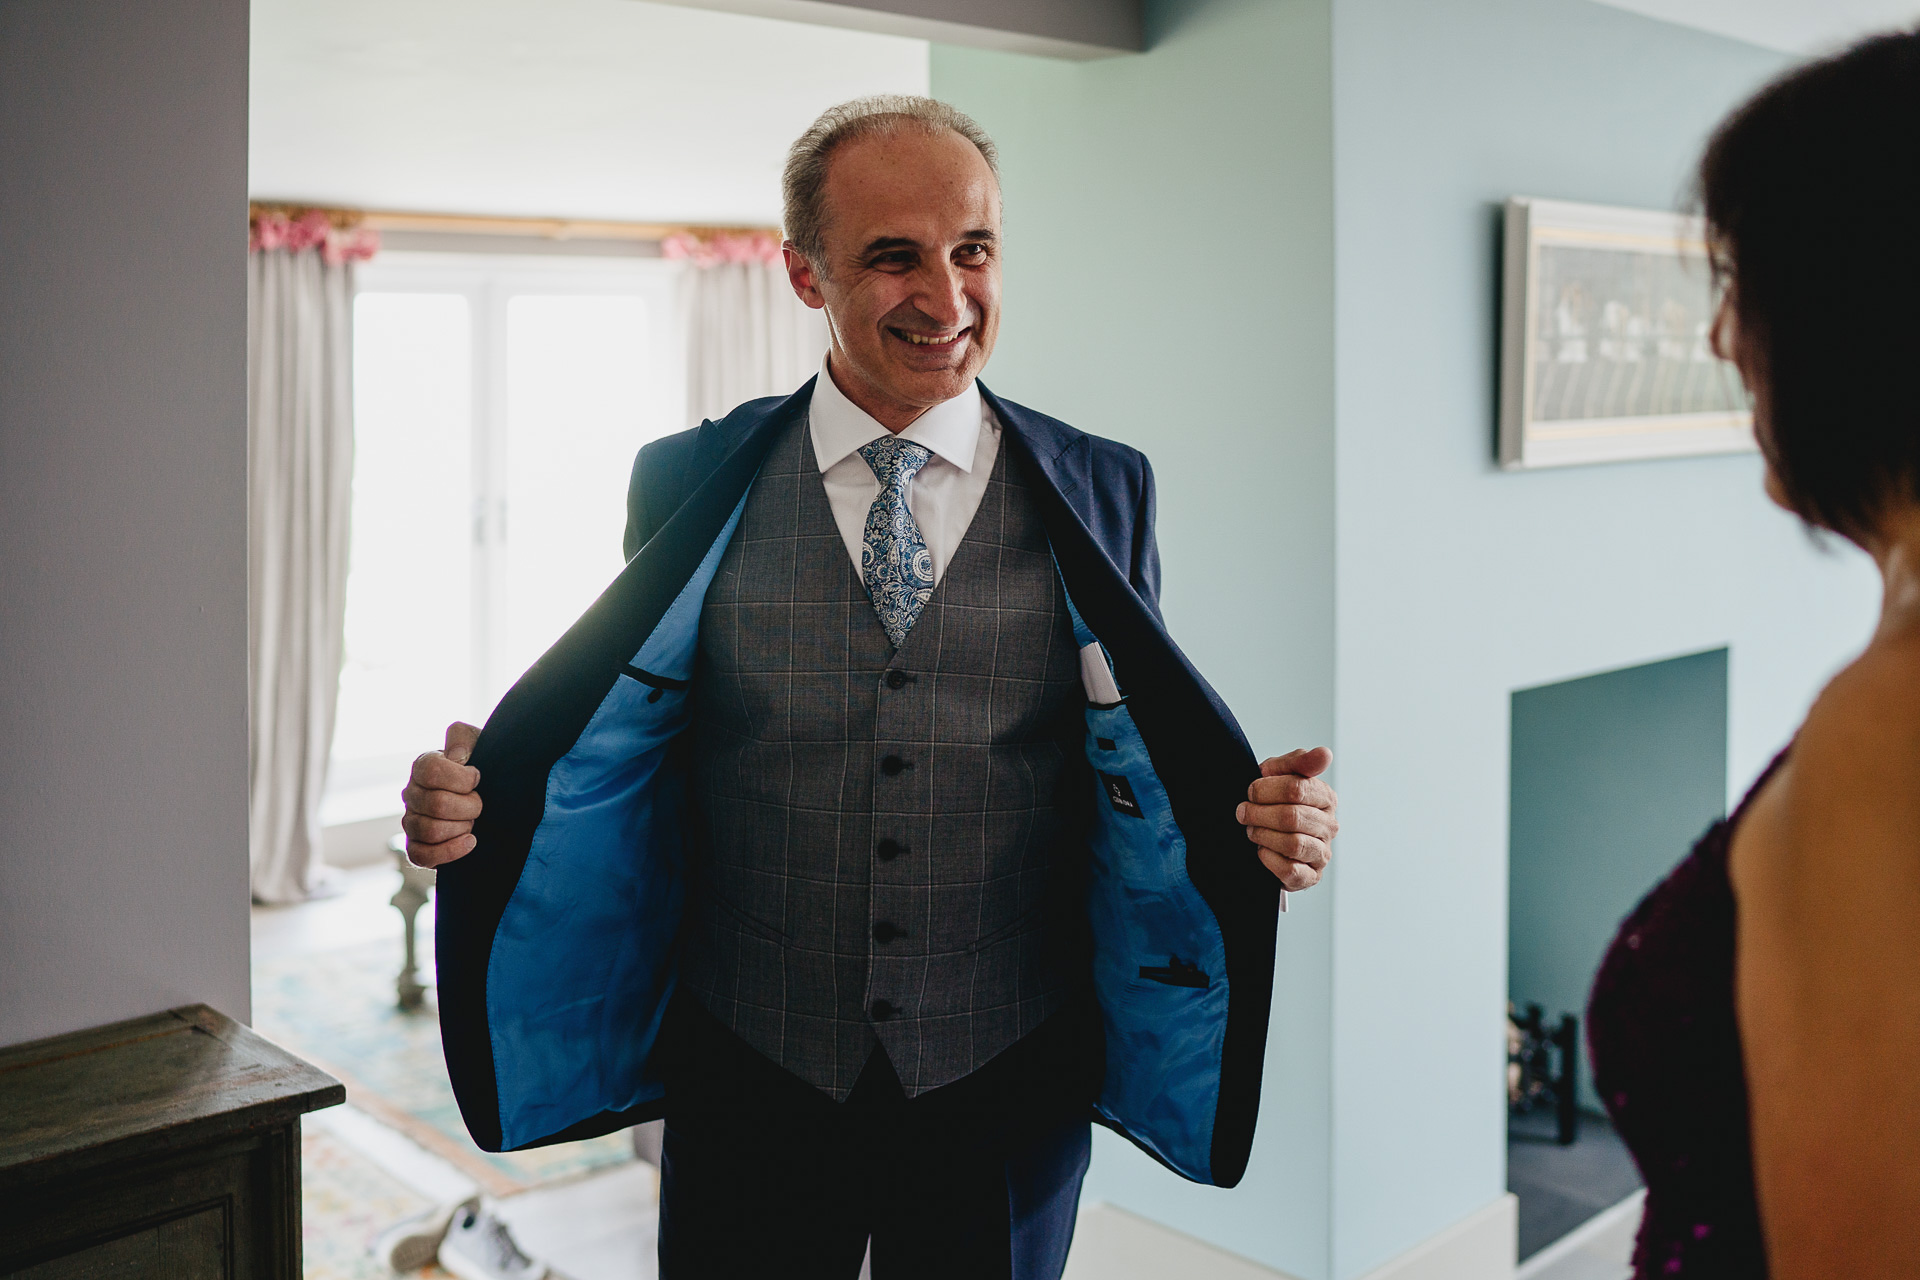 A man showing off his suit